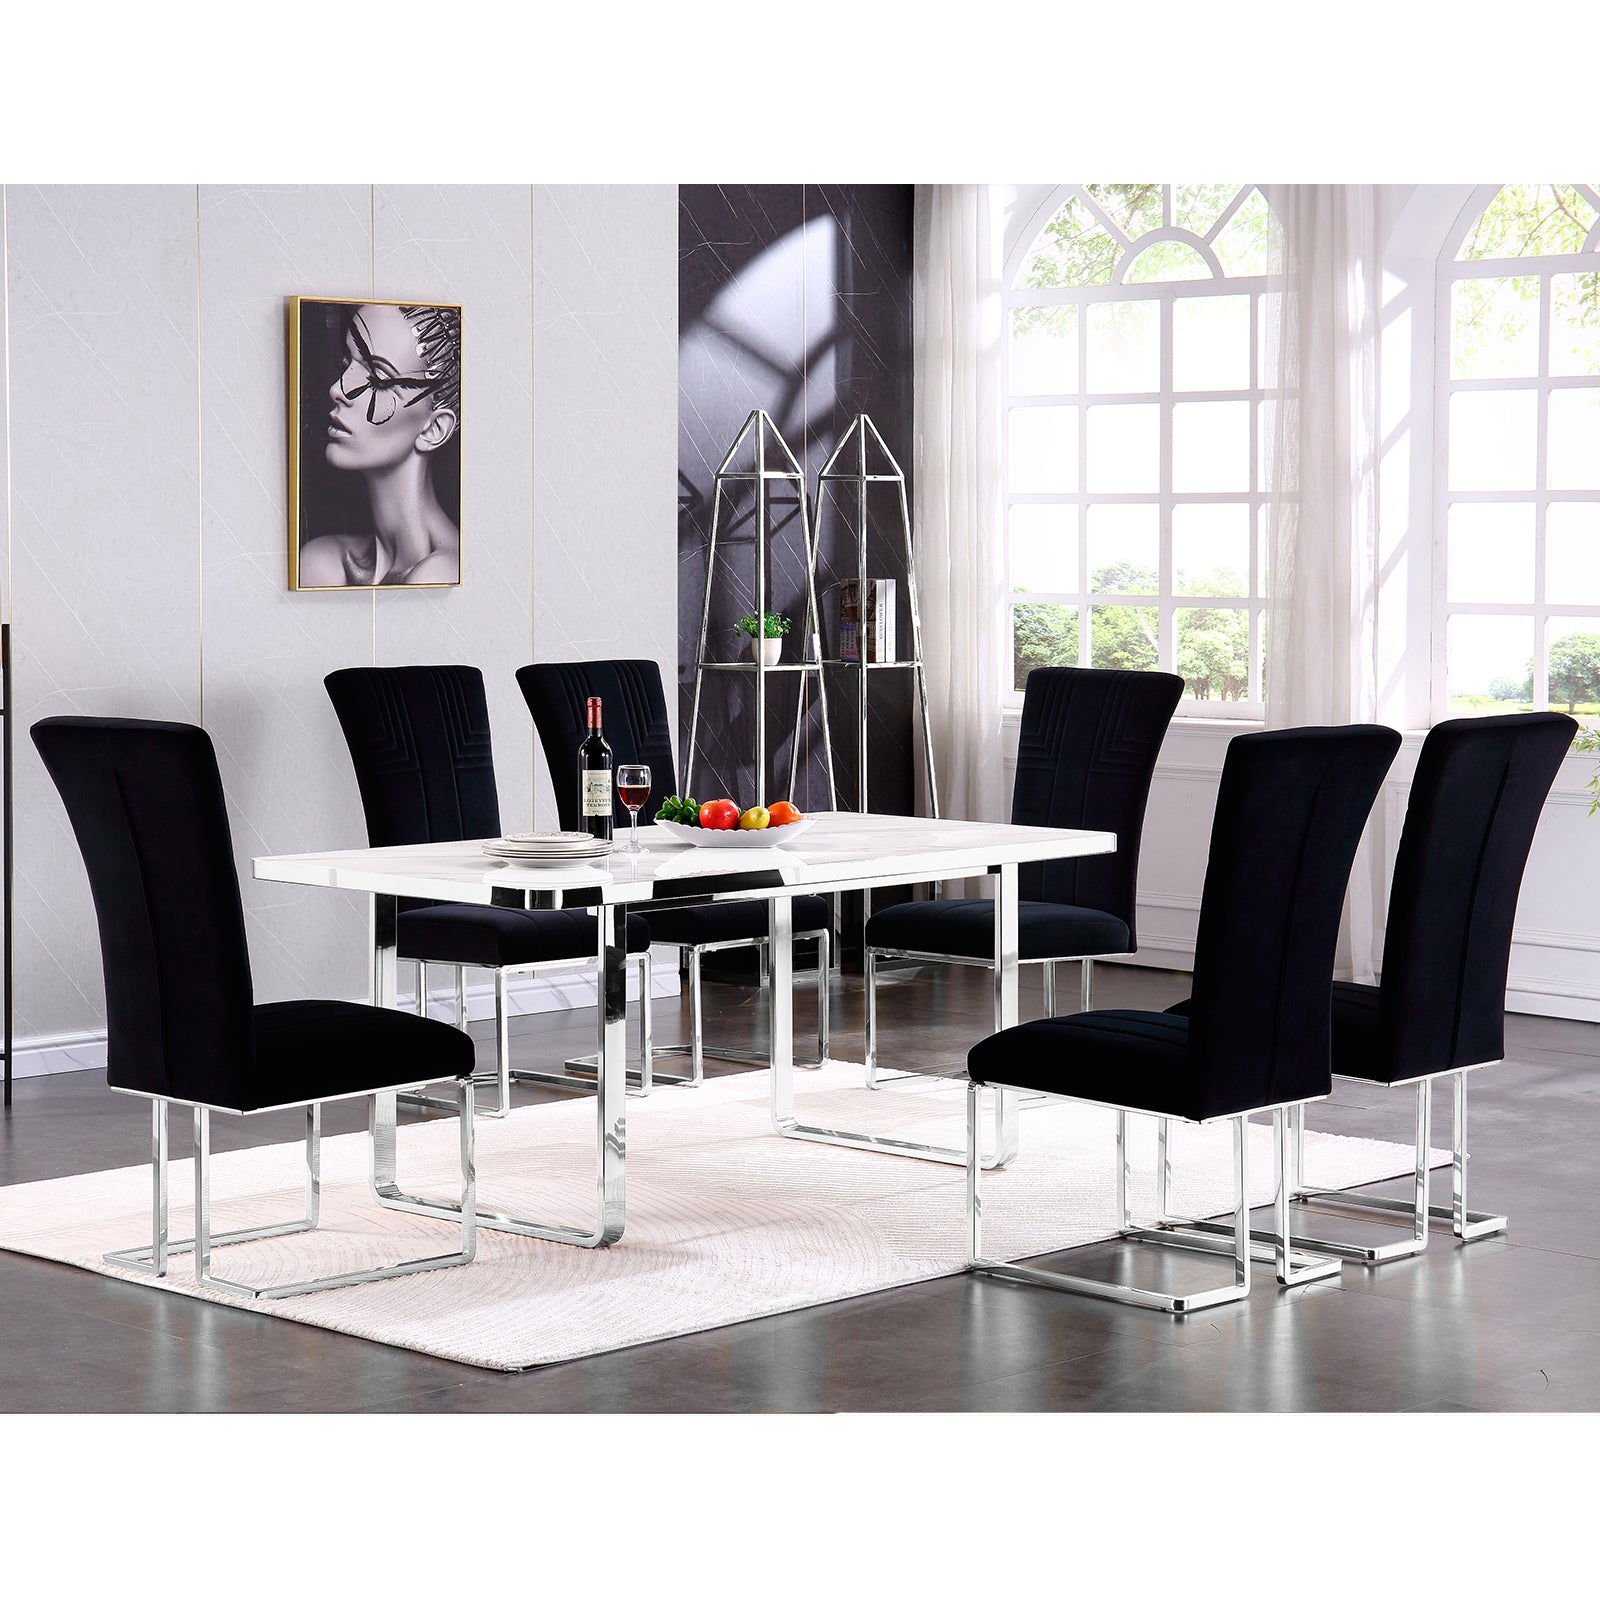 715 Set | AUZ Black and Silver Dining room Sets for 6